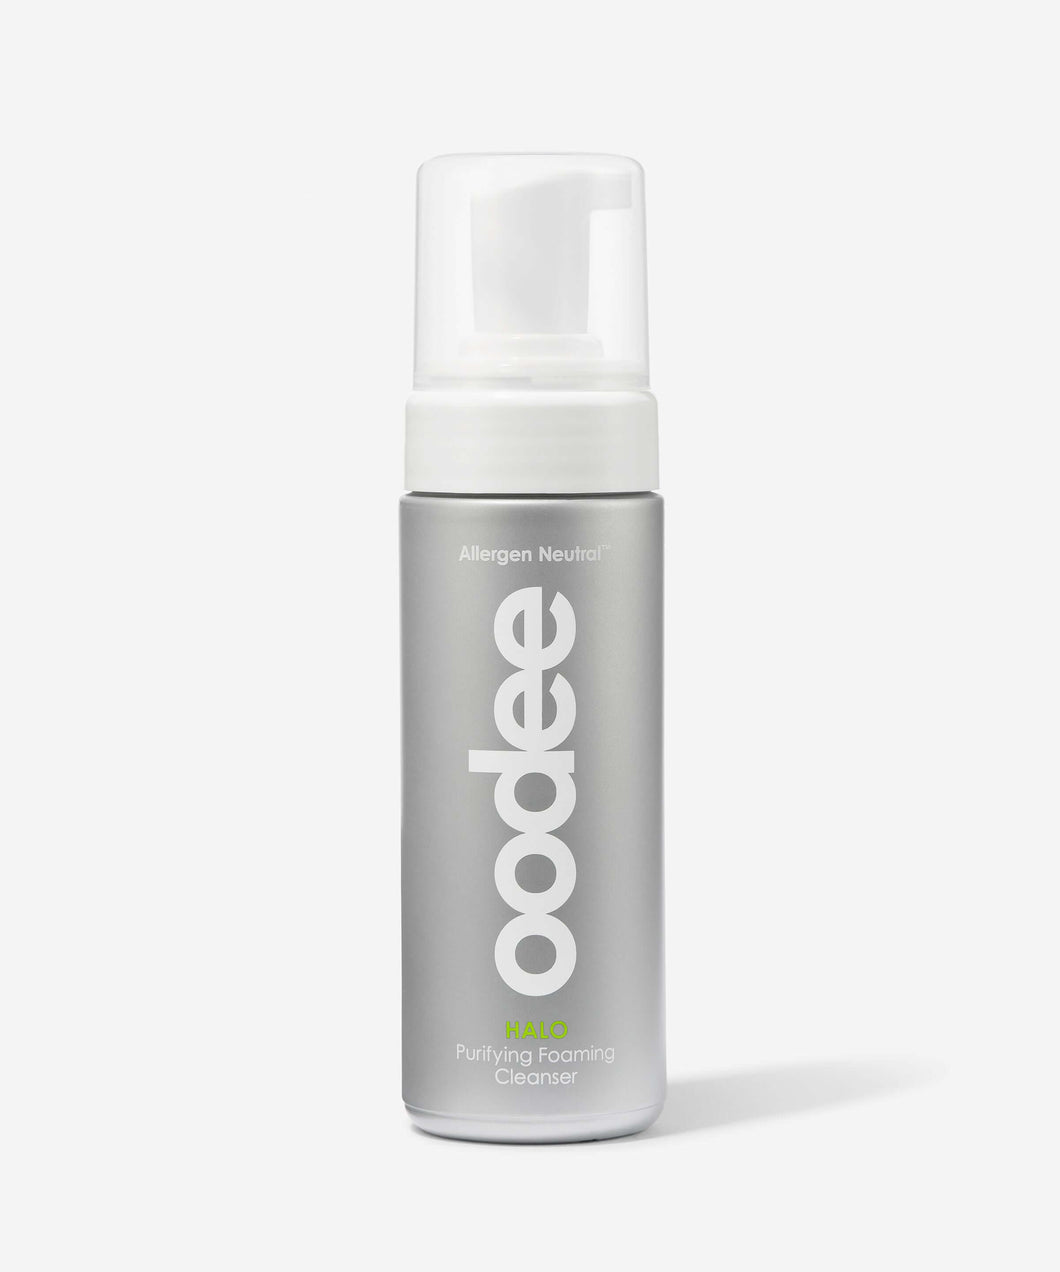 oodee halo purifying foaming cleanser with rice protein and prickly pear - allergen neutral skincare products